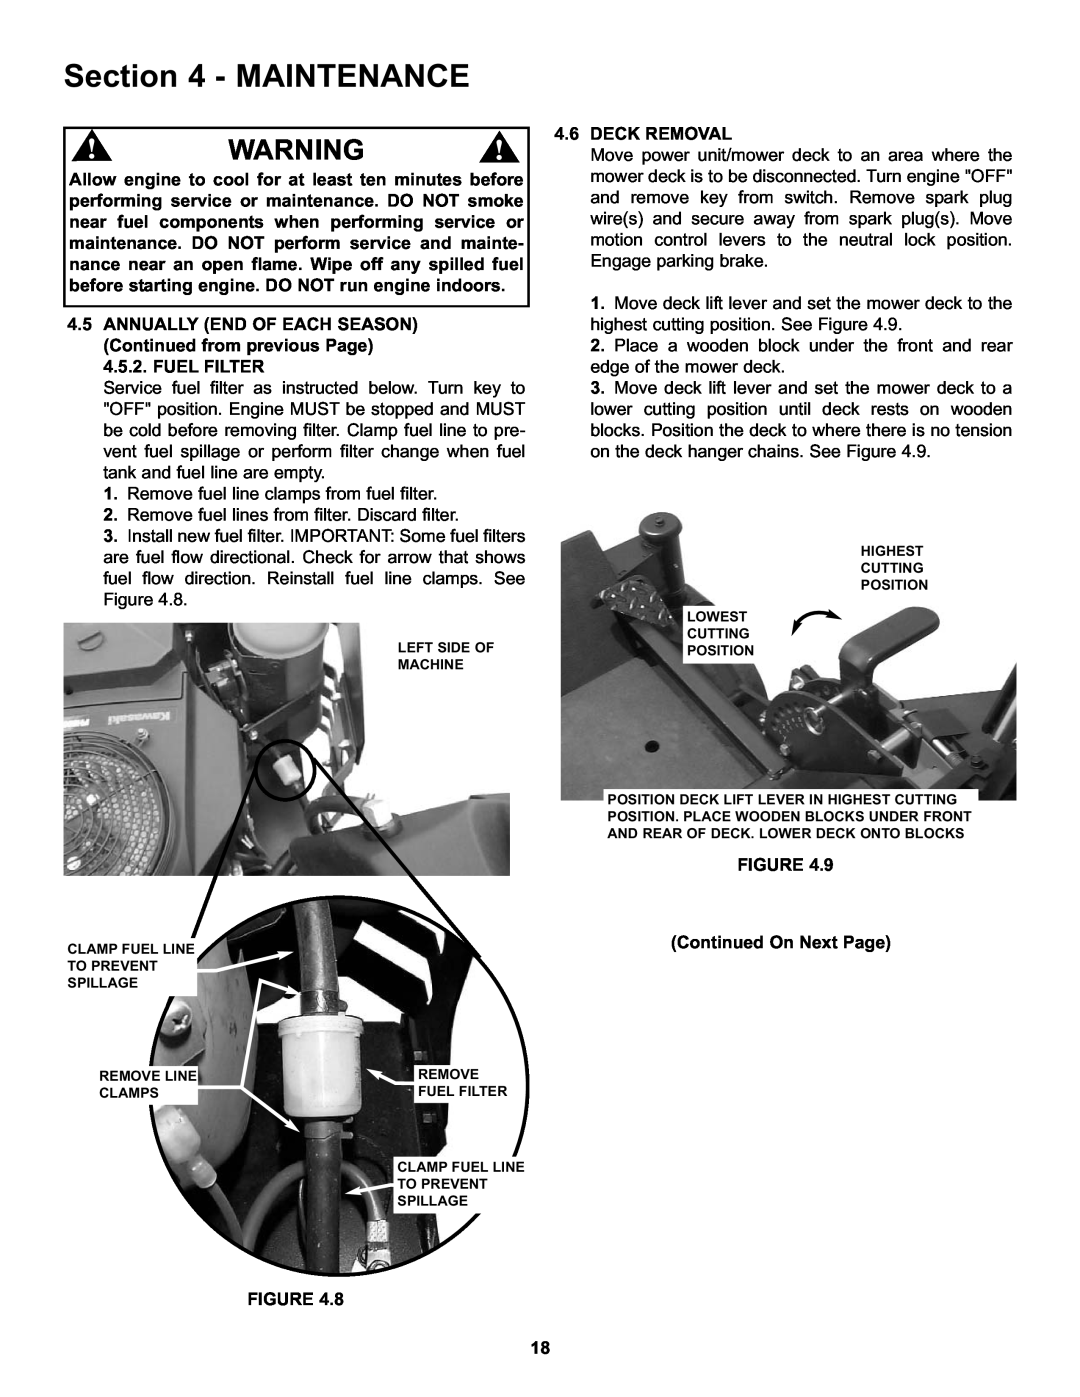 Snapper CZT19481KWV important safety instructions Maintenanceoperating Instructions, Deck Removal, Continued On Next Page 